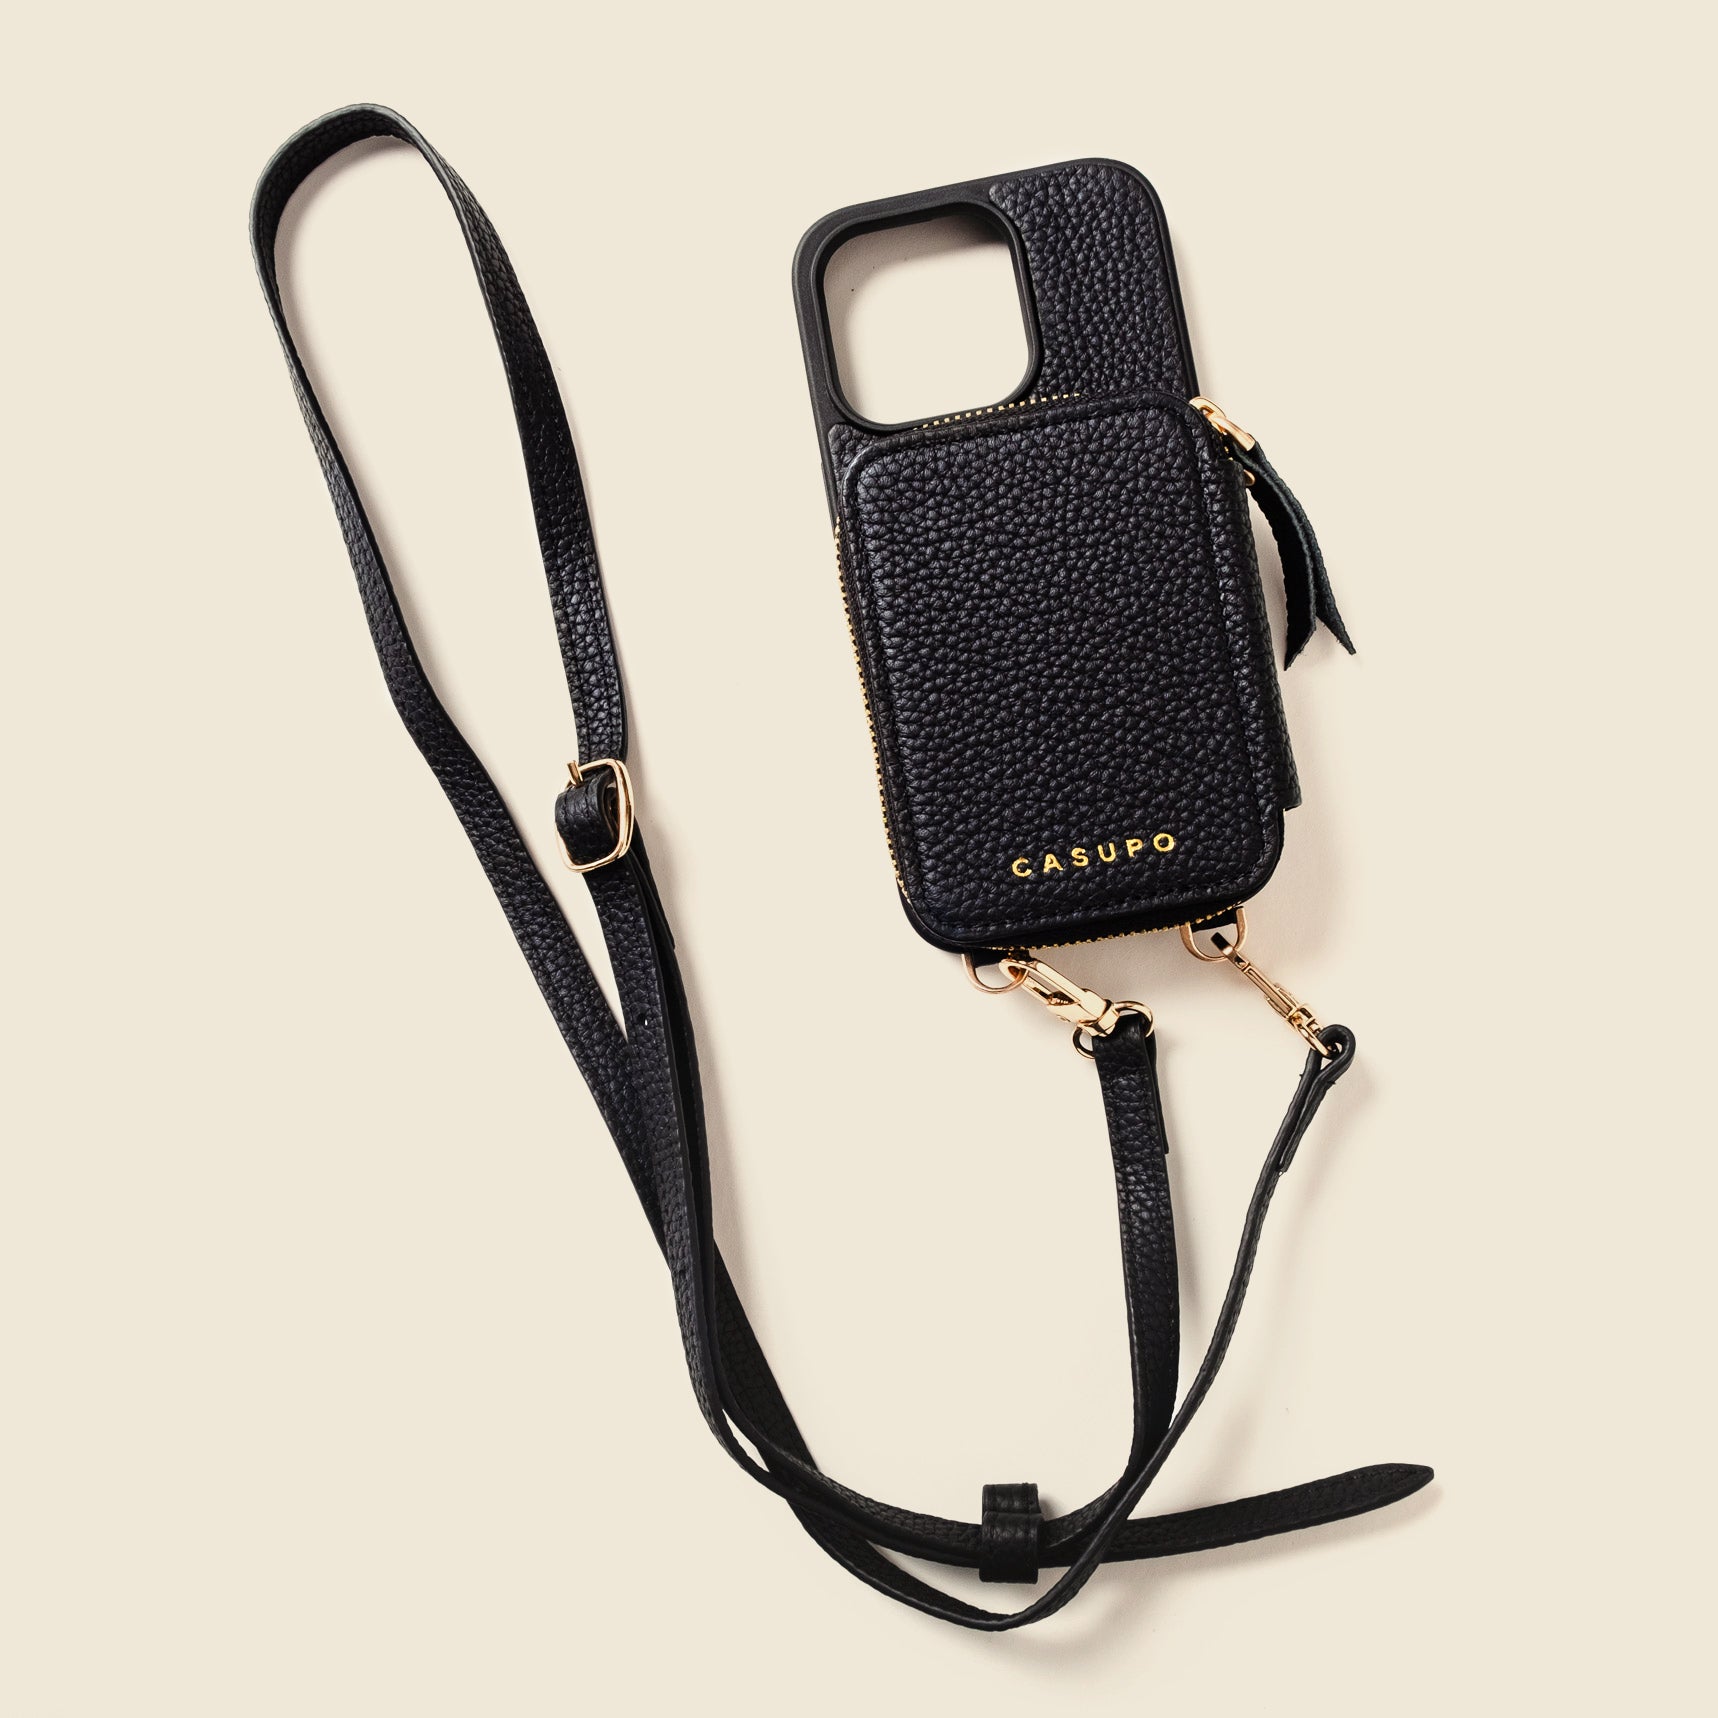 Black leather iphone case bandolier wallet bag with crossbody strap